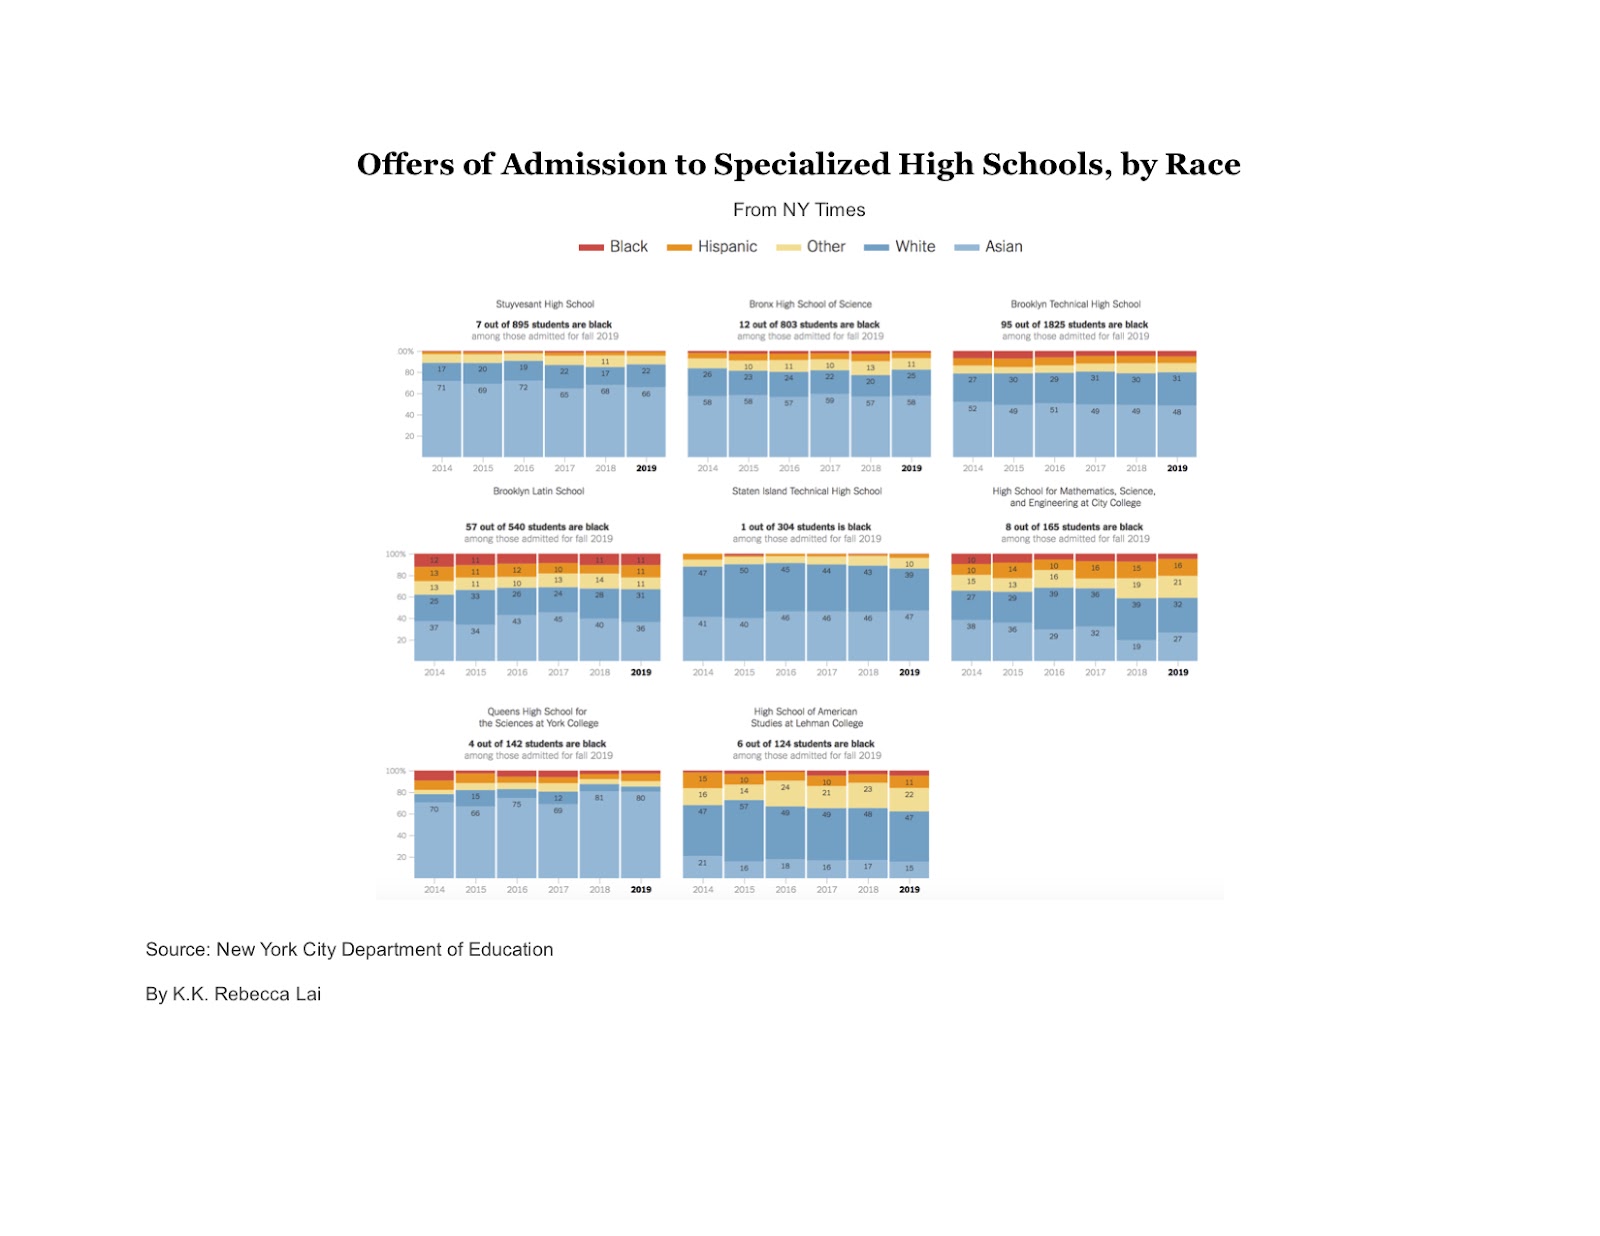 Stacked bar charts comparing racial and ethnic makeup of offers for each of the specialized high schools from 2014-2019. Originally printed in the New York Times in 2019.